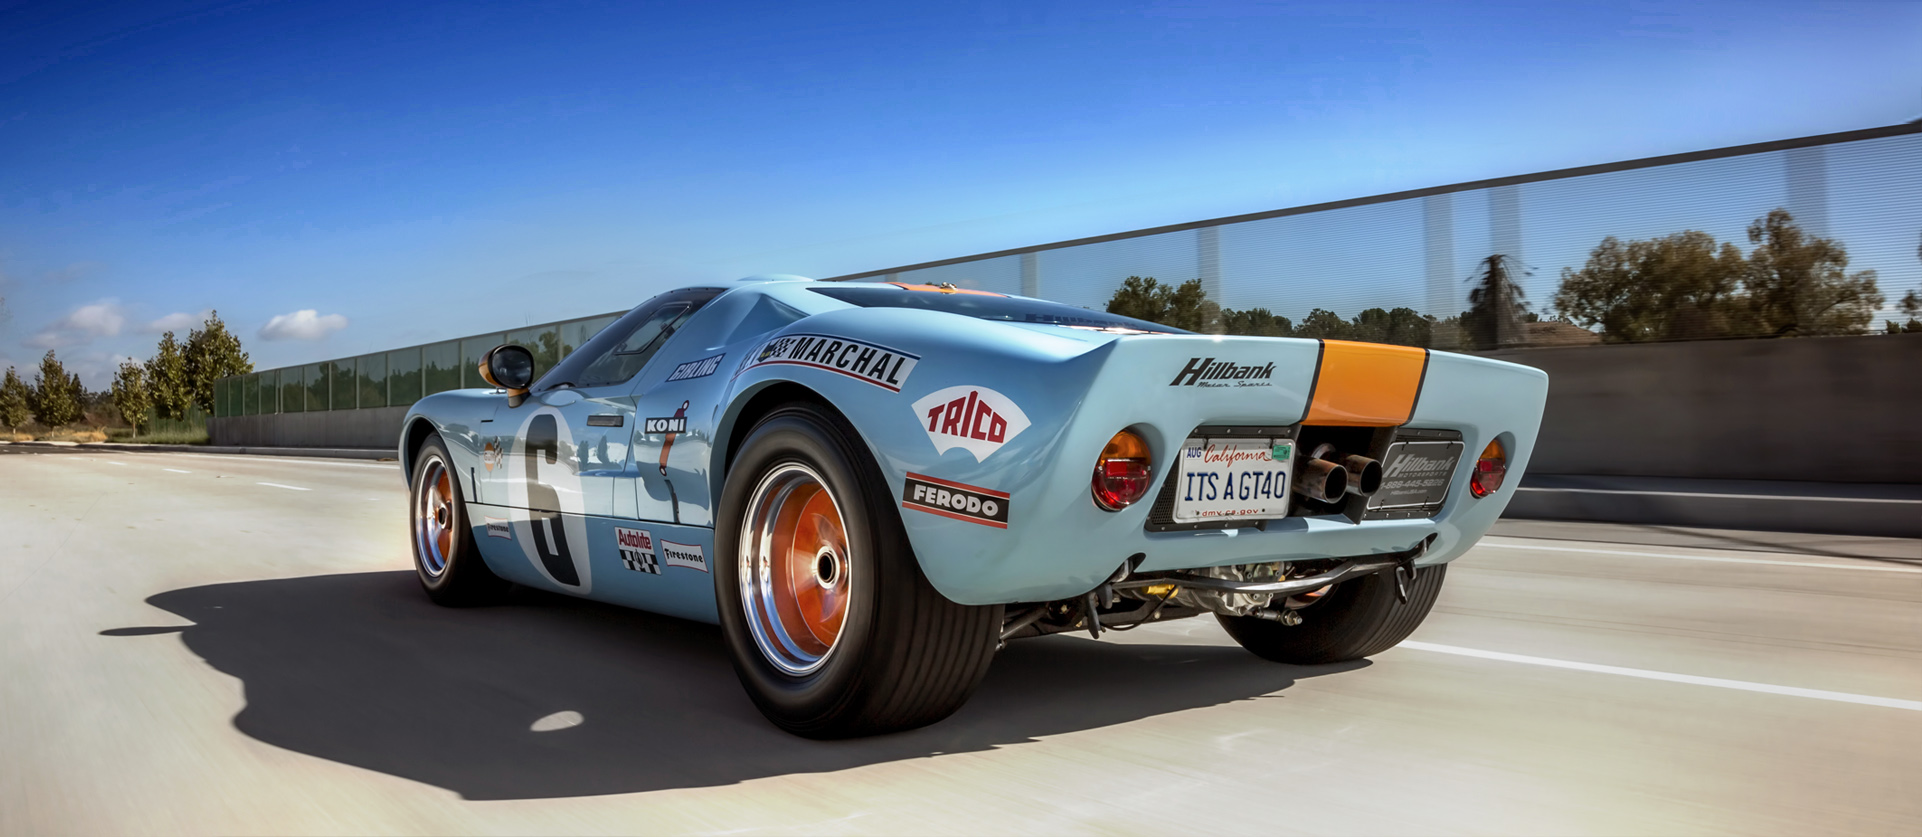 Genuine GT40 car for sale, produced by Superformance